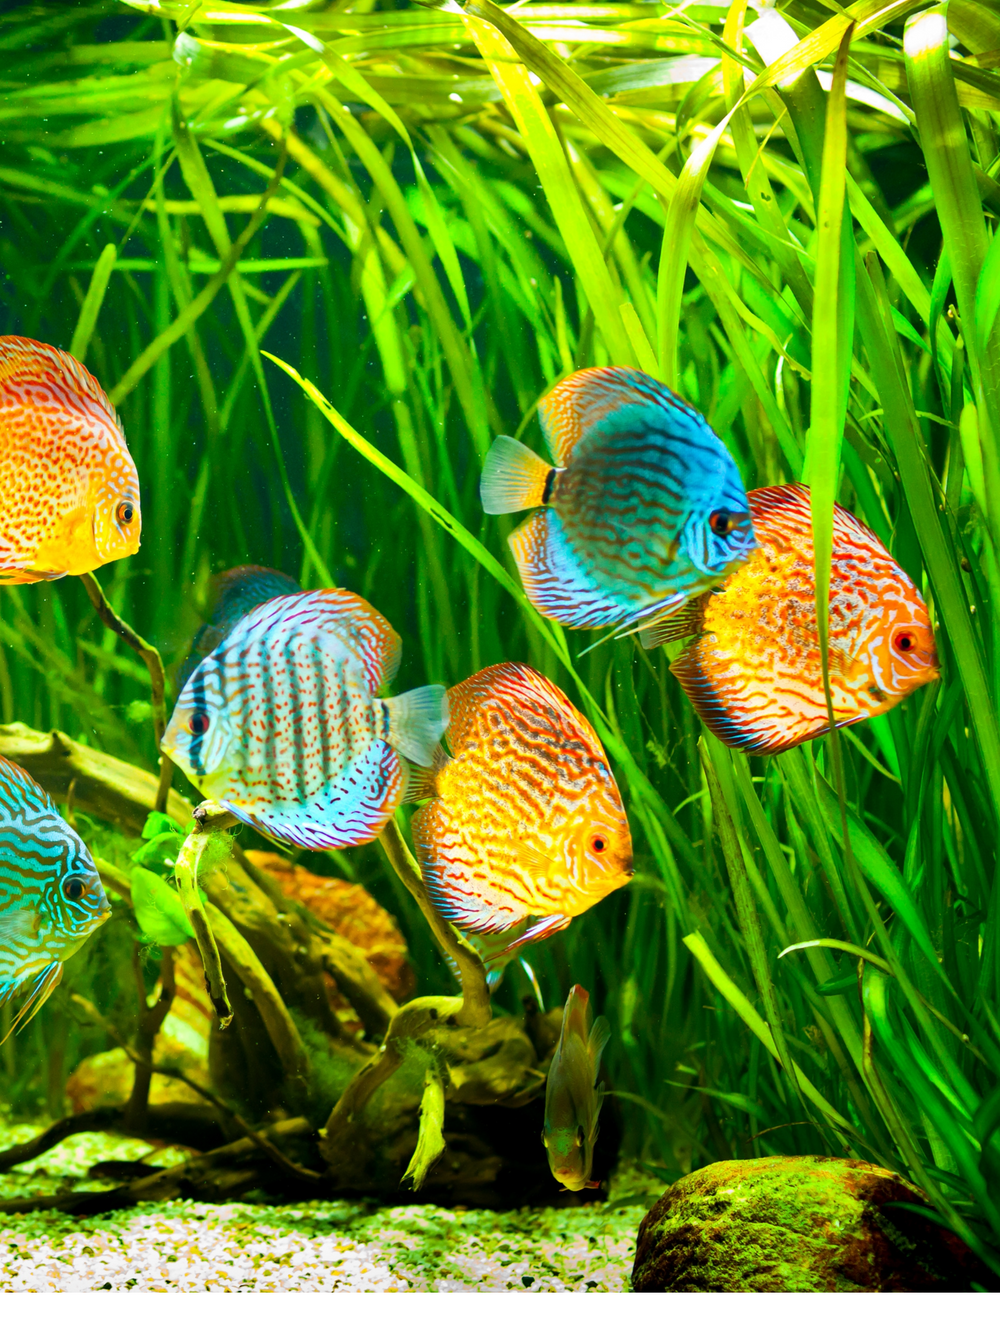 Thailand Assorted Discus Mixed Fancy Colors